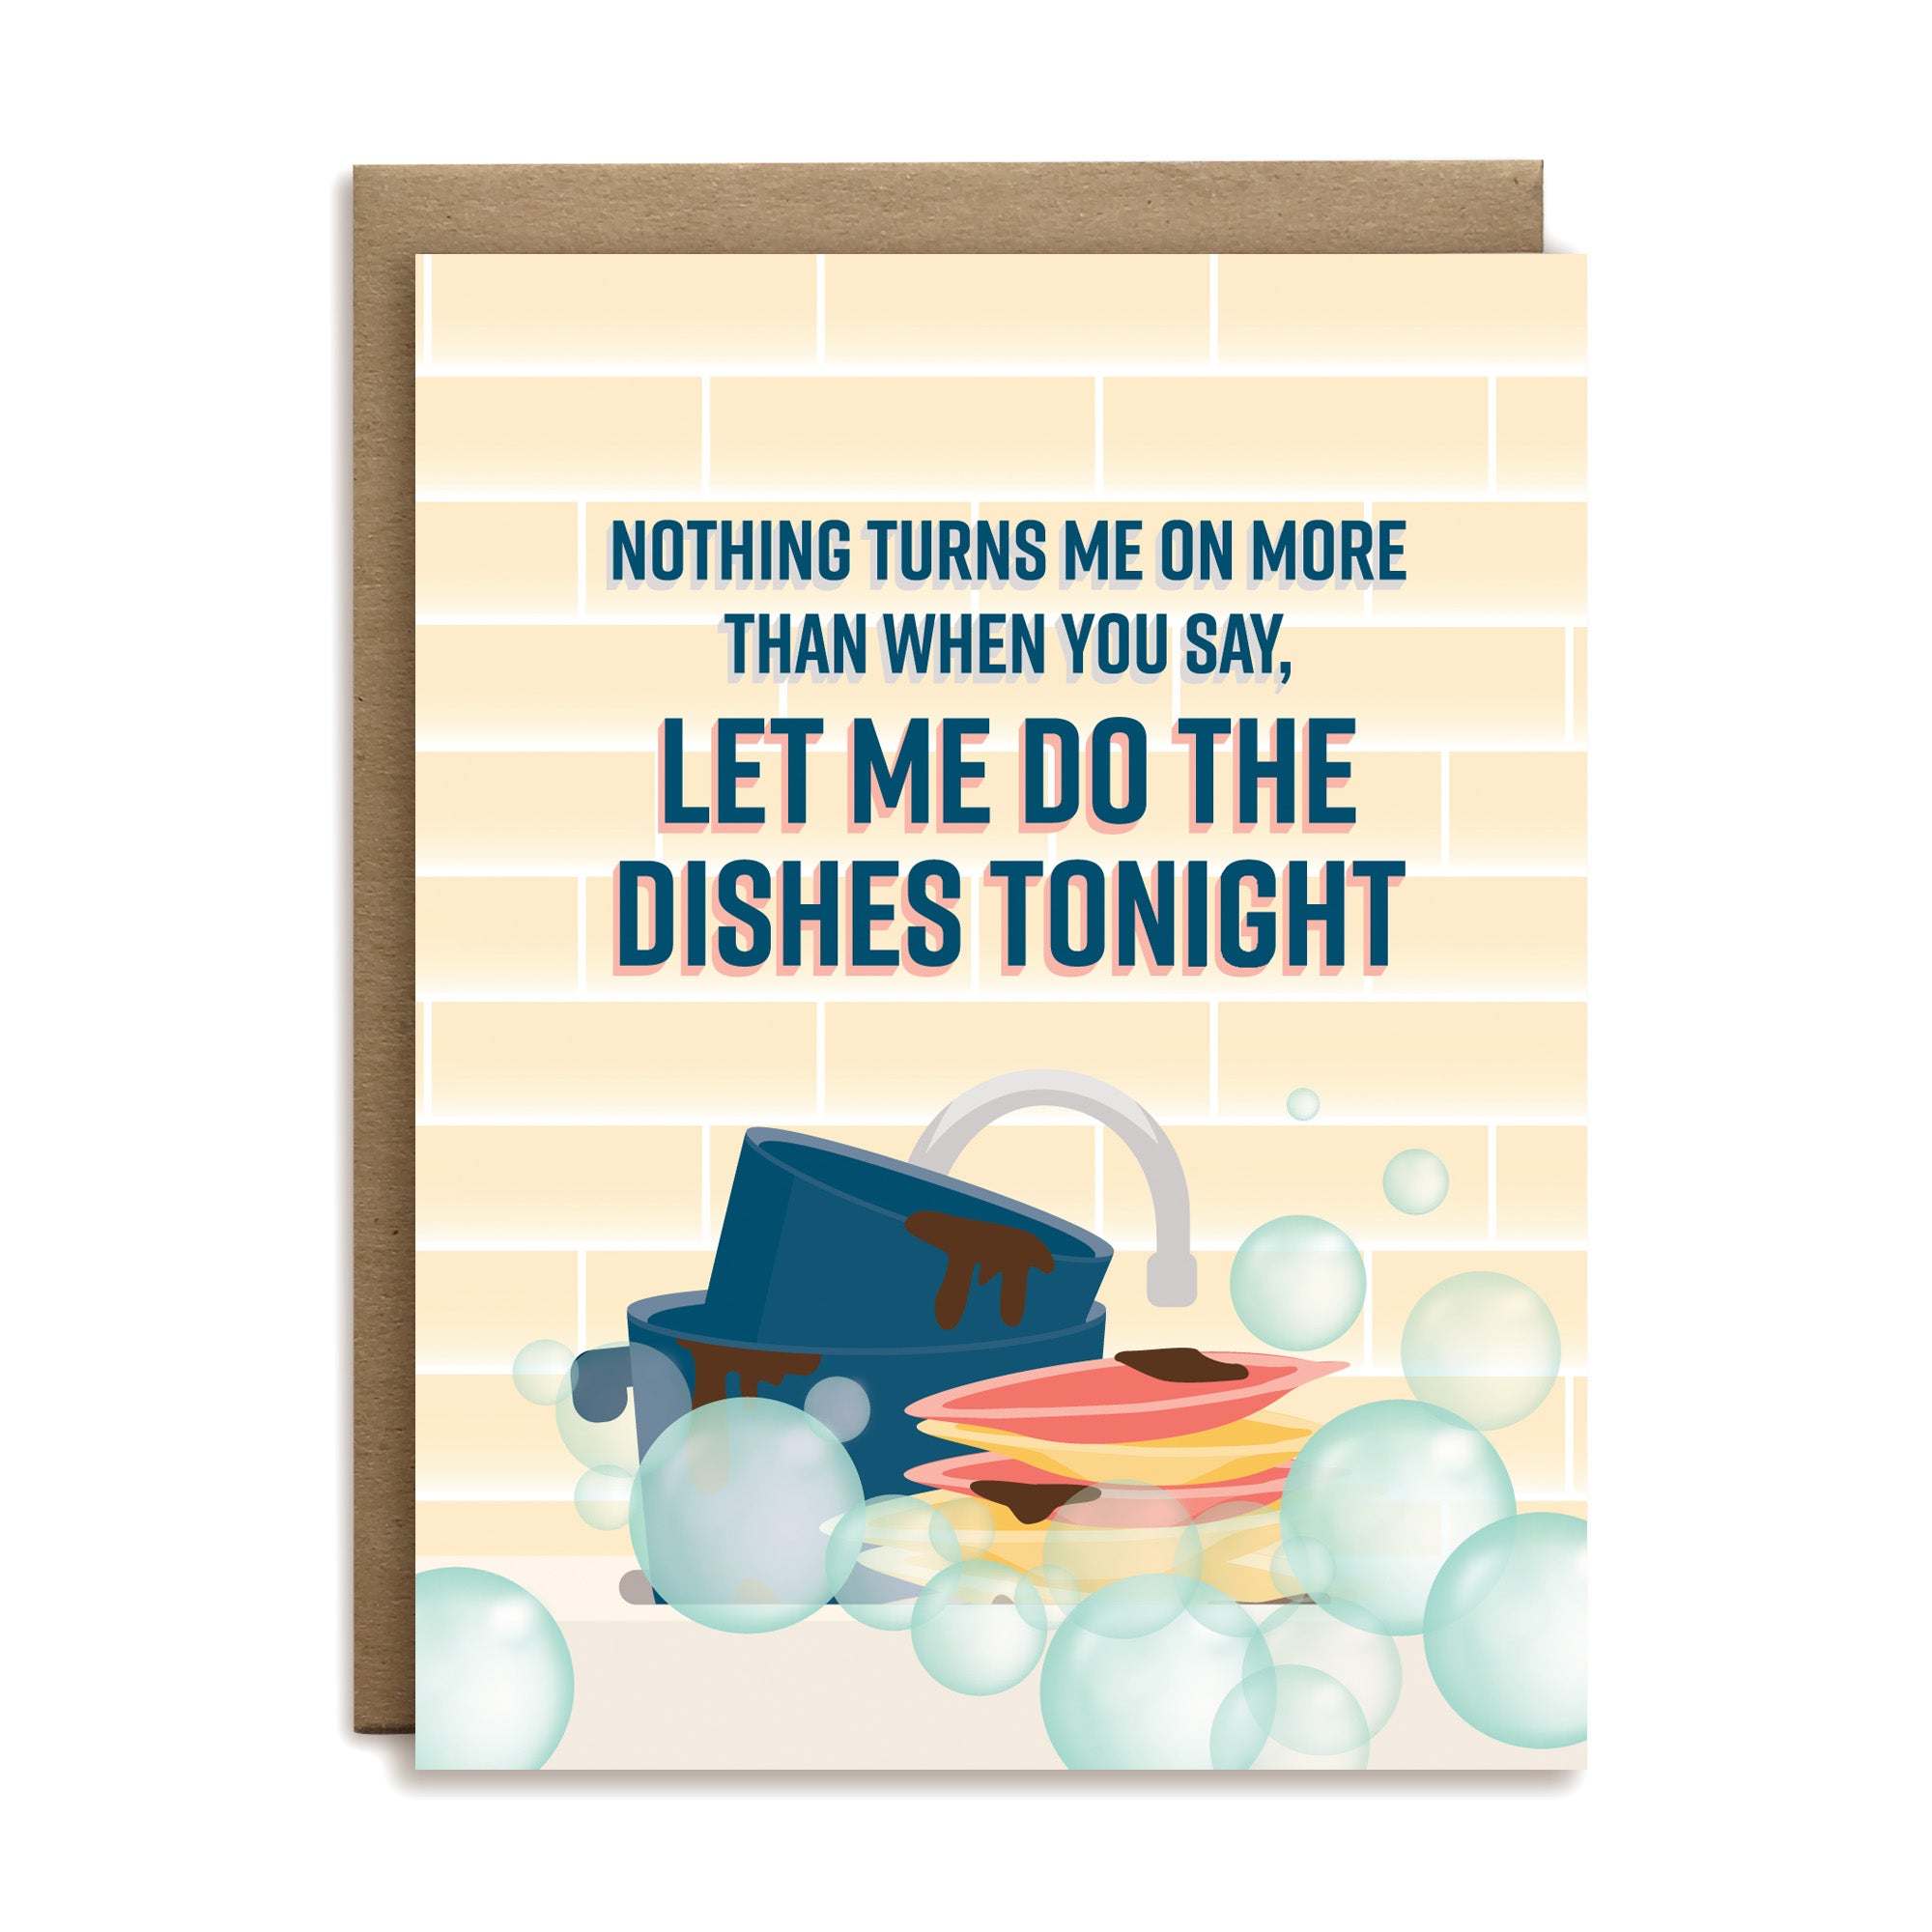 Nothing turns me on more than when you say, let me do the dishes tonight love greeting card by I&